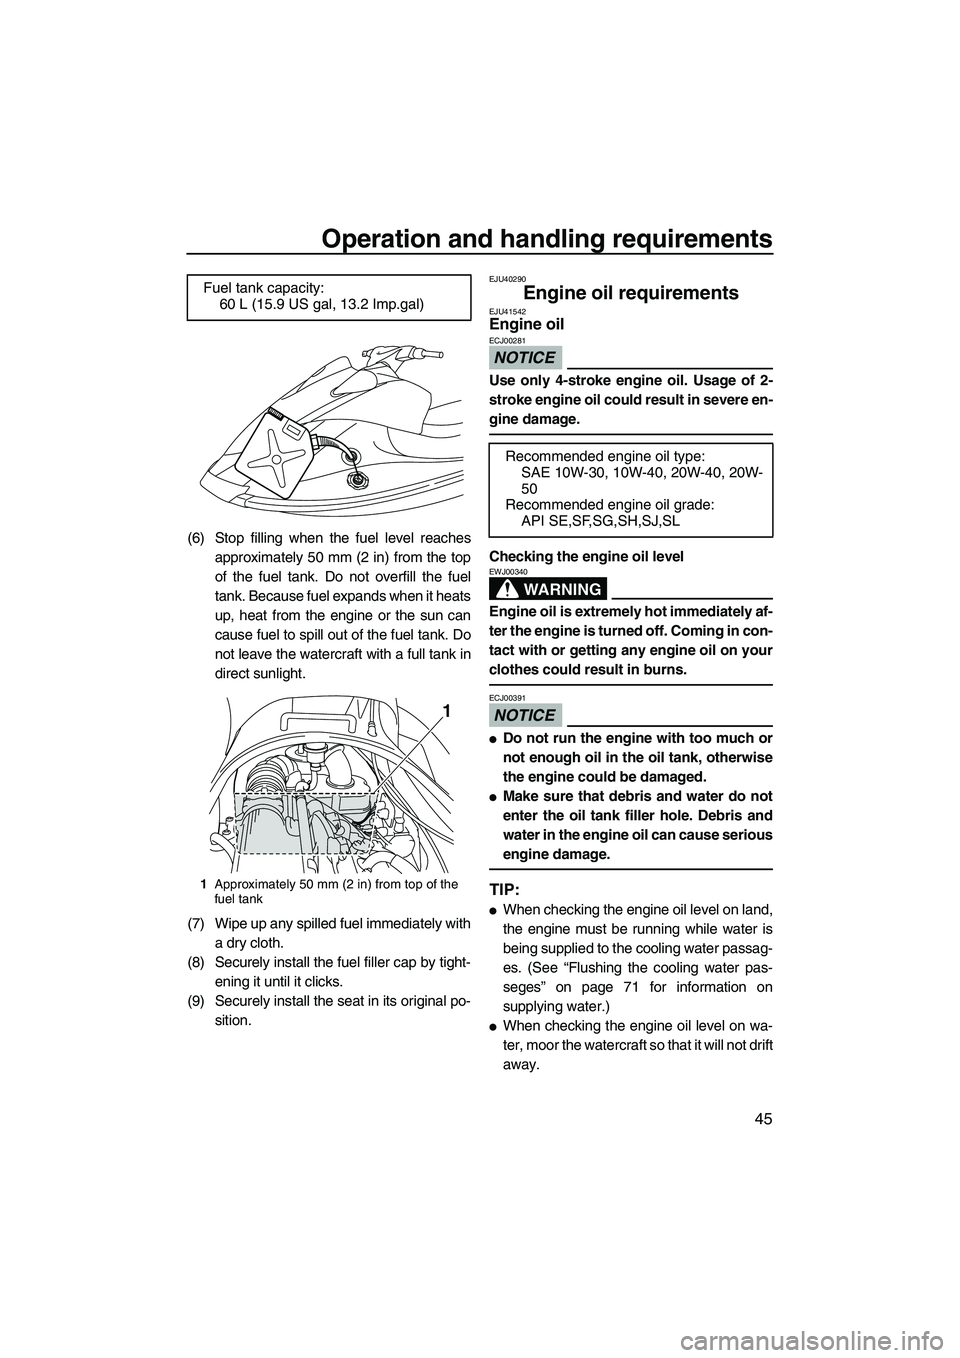 YAMAHA VX 2012  Owners Manual Operation and handling requirements
45
(6) Stop filling when the fuel level reaches
approximately 50 mm (2 in) from the top
of the fuel tank. Do not overfill the fuel
tank. Because fuel expands when i